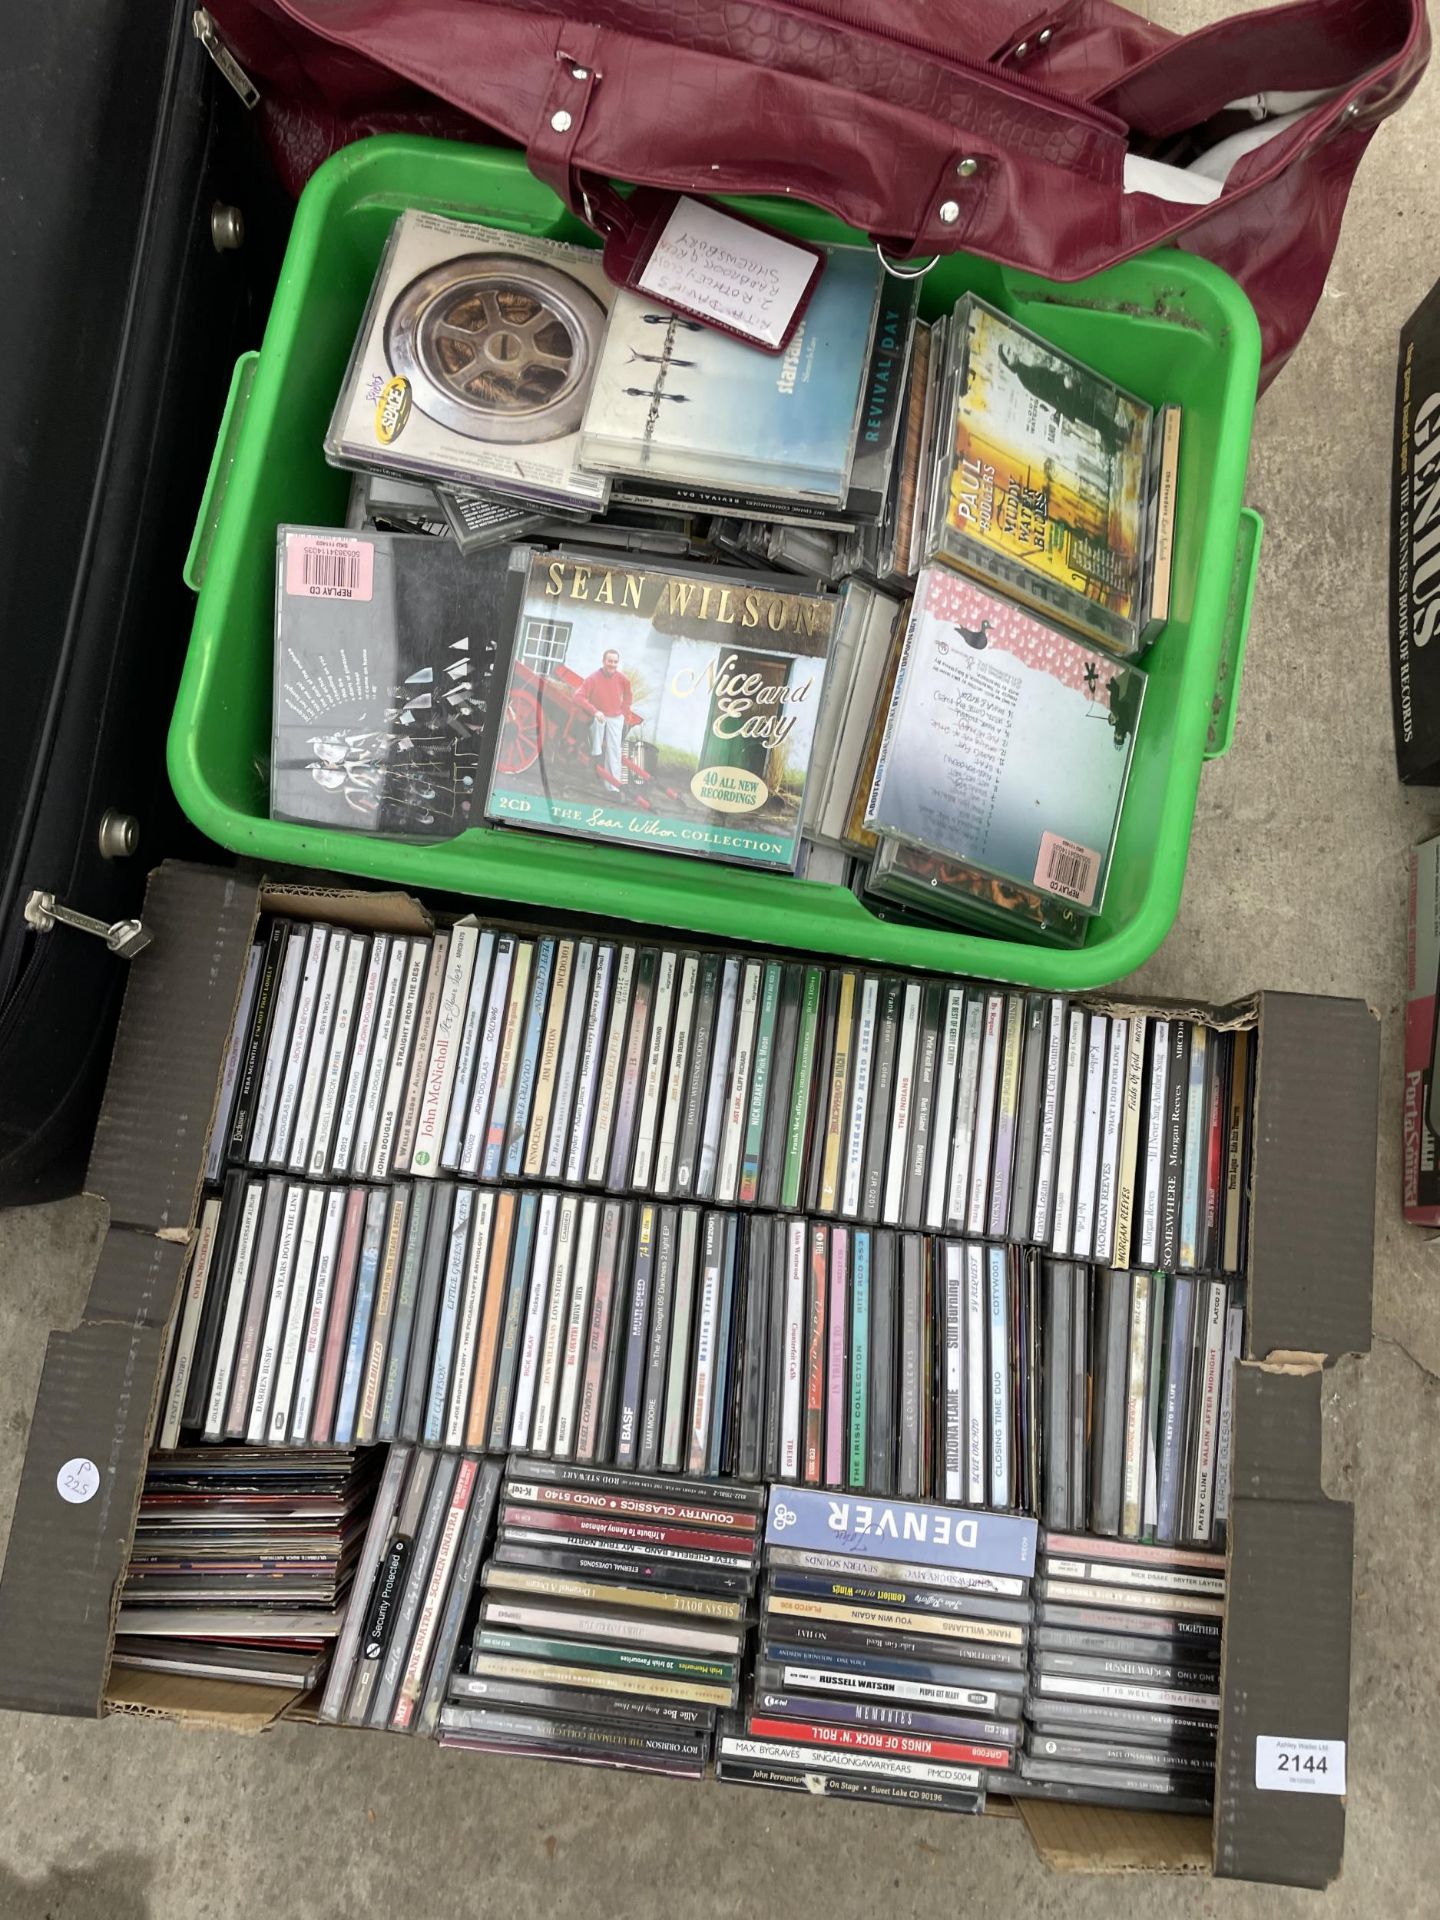 AN EXTREMELY LARGE COLLECTION OF CDS - Image 2 of 4